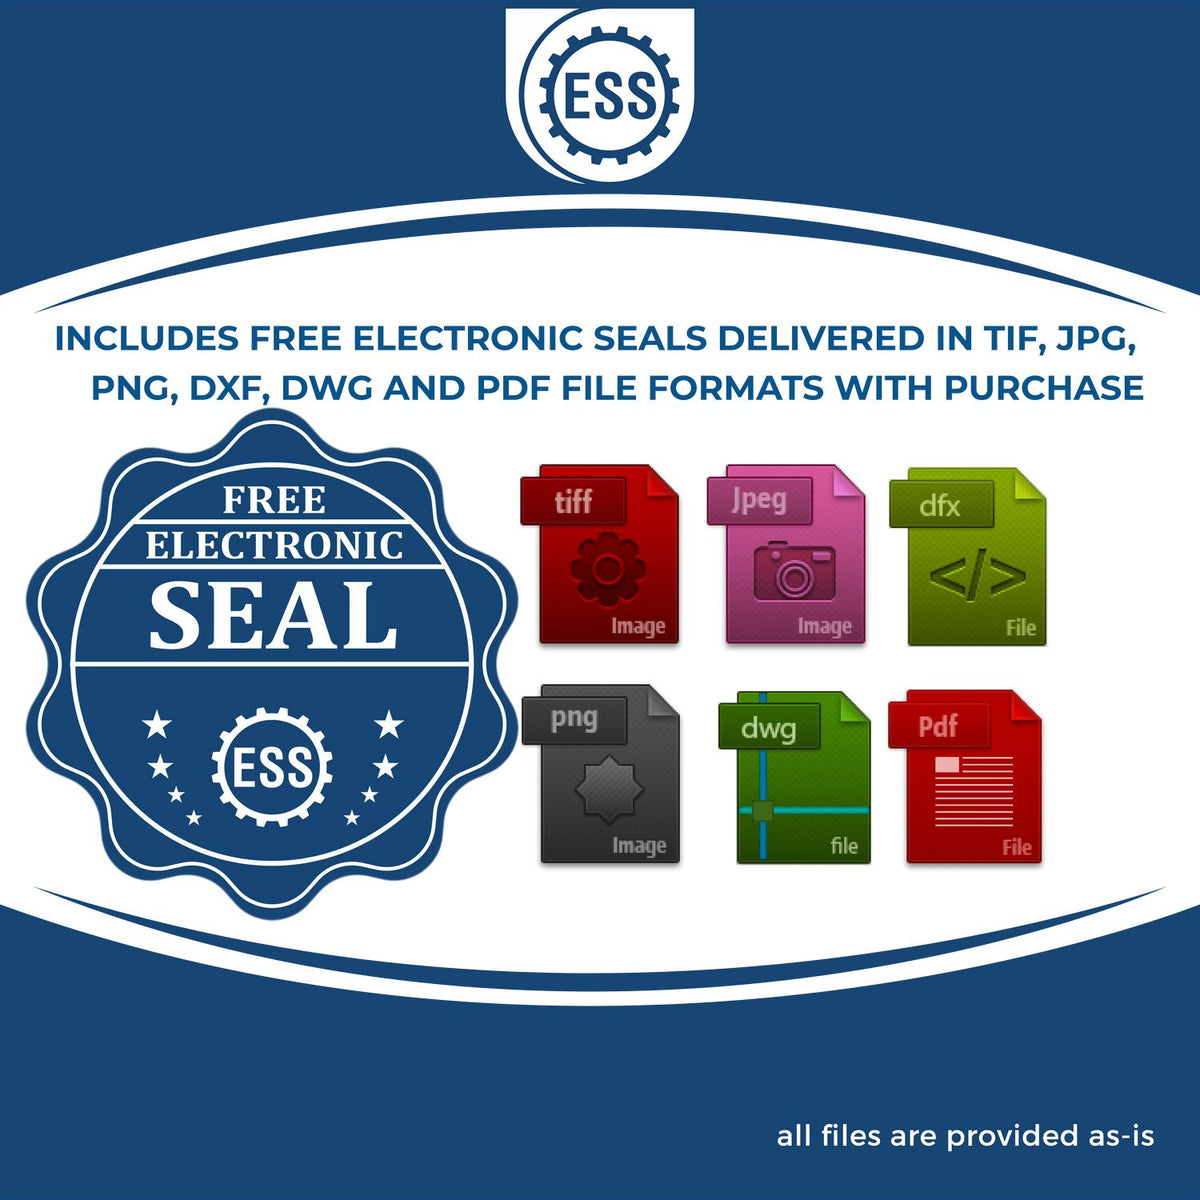 An infographic for the free electronic seal for the Premium MaxLight Pre-Inked Ohio Engineering Stamp illustrating the different file type icons such as DXF, DWG, TIF, JPG and PNG.